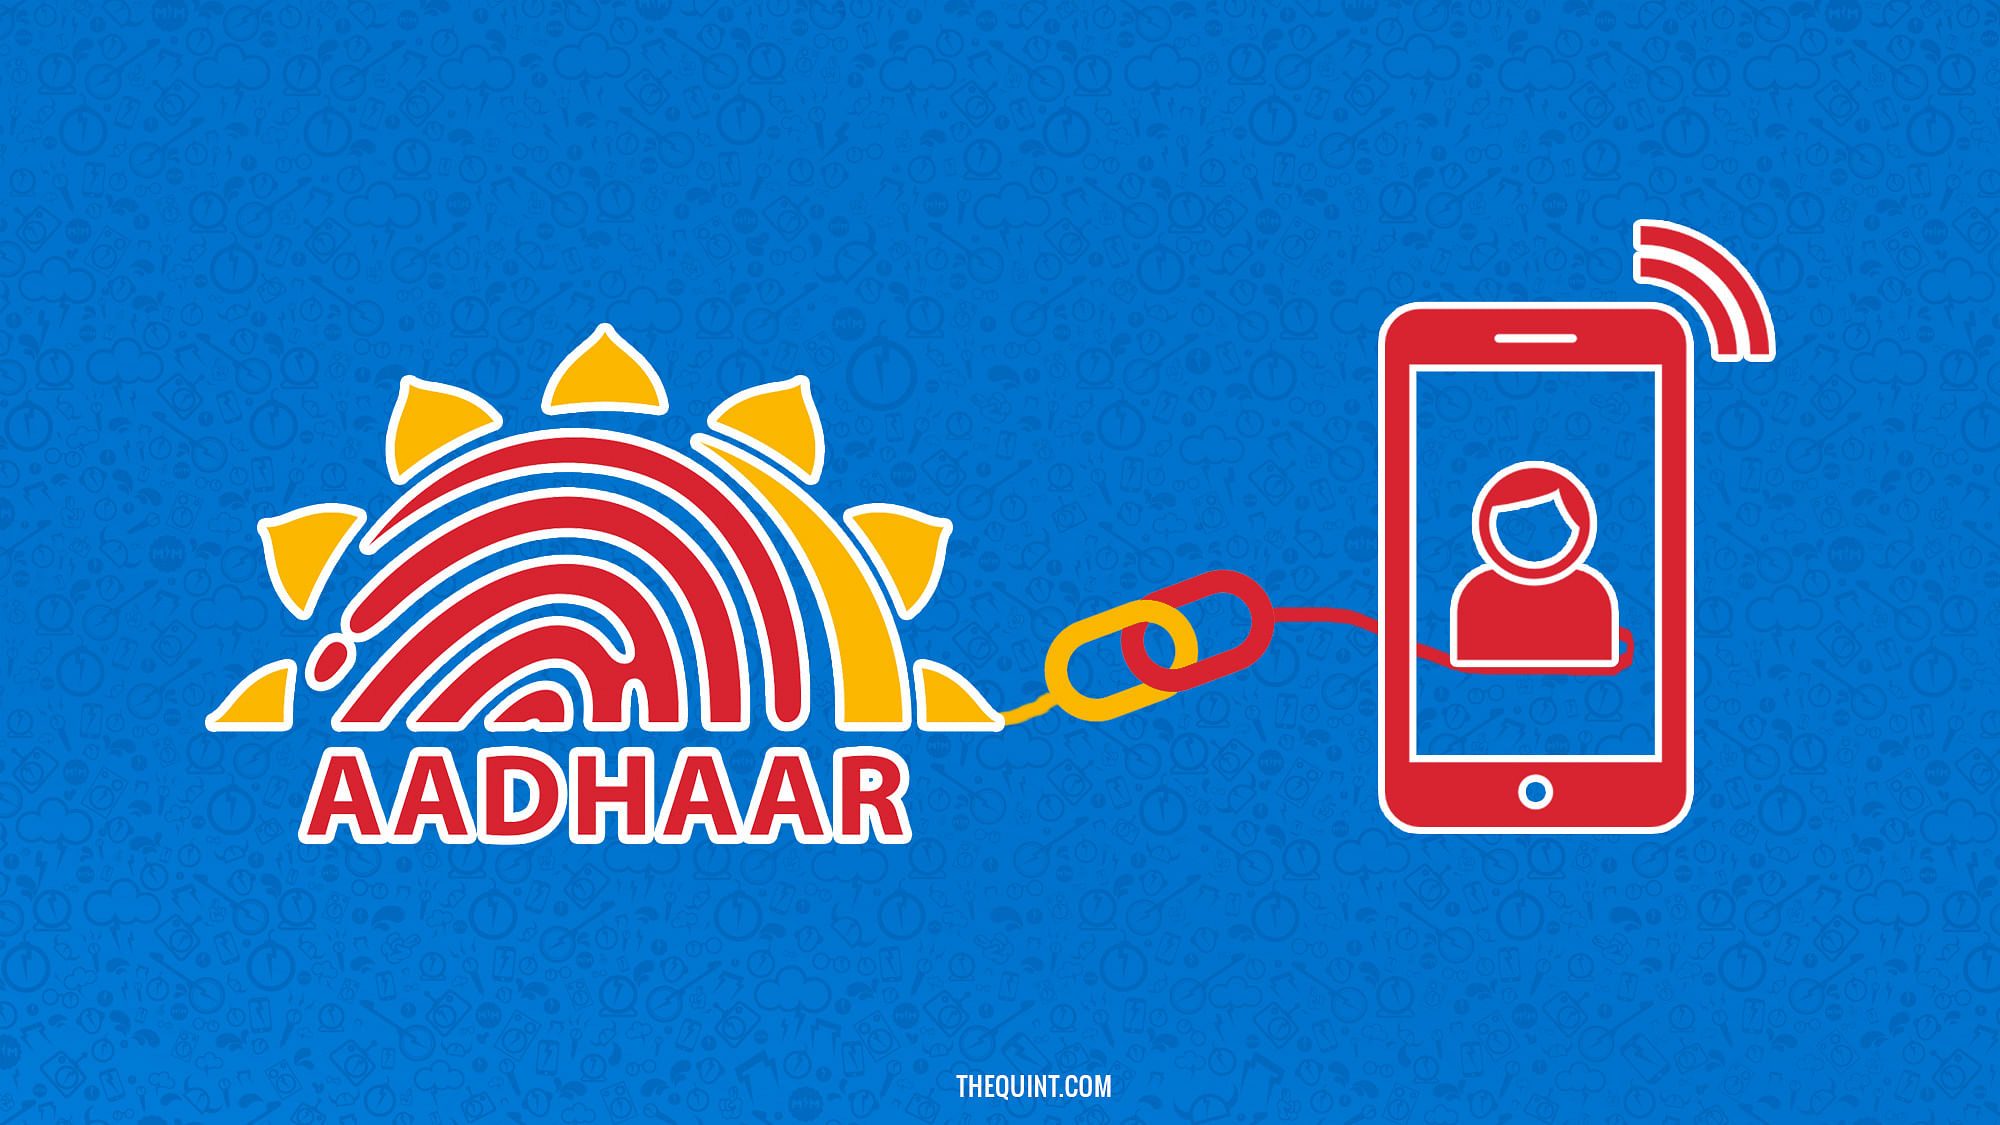 Image used for representation. Telecom service providers cannot ask for linking mobile number with Aadhaar.&nbsp;